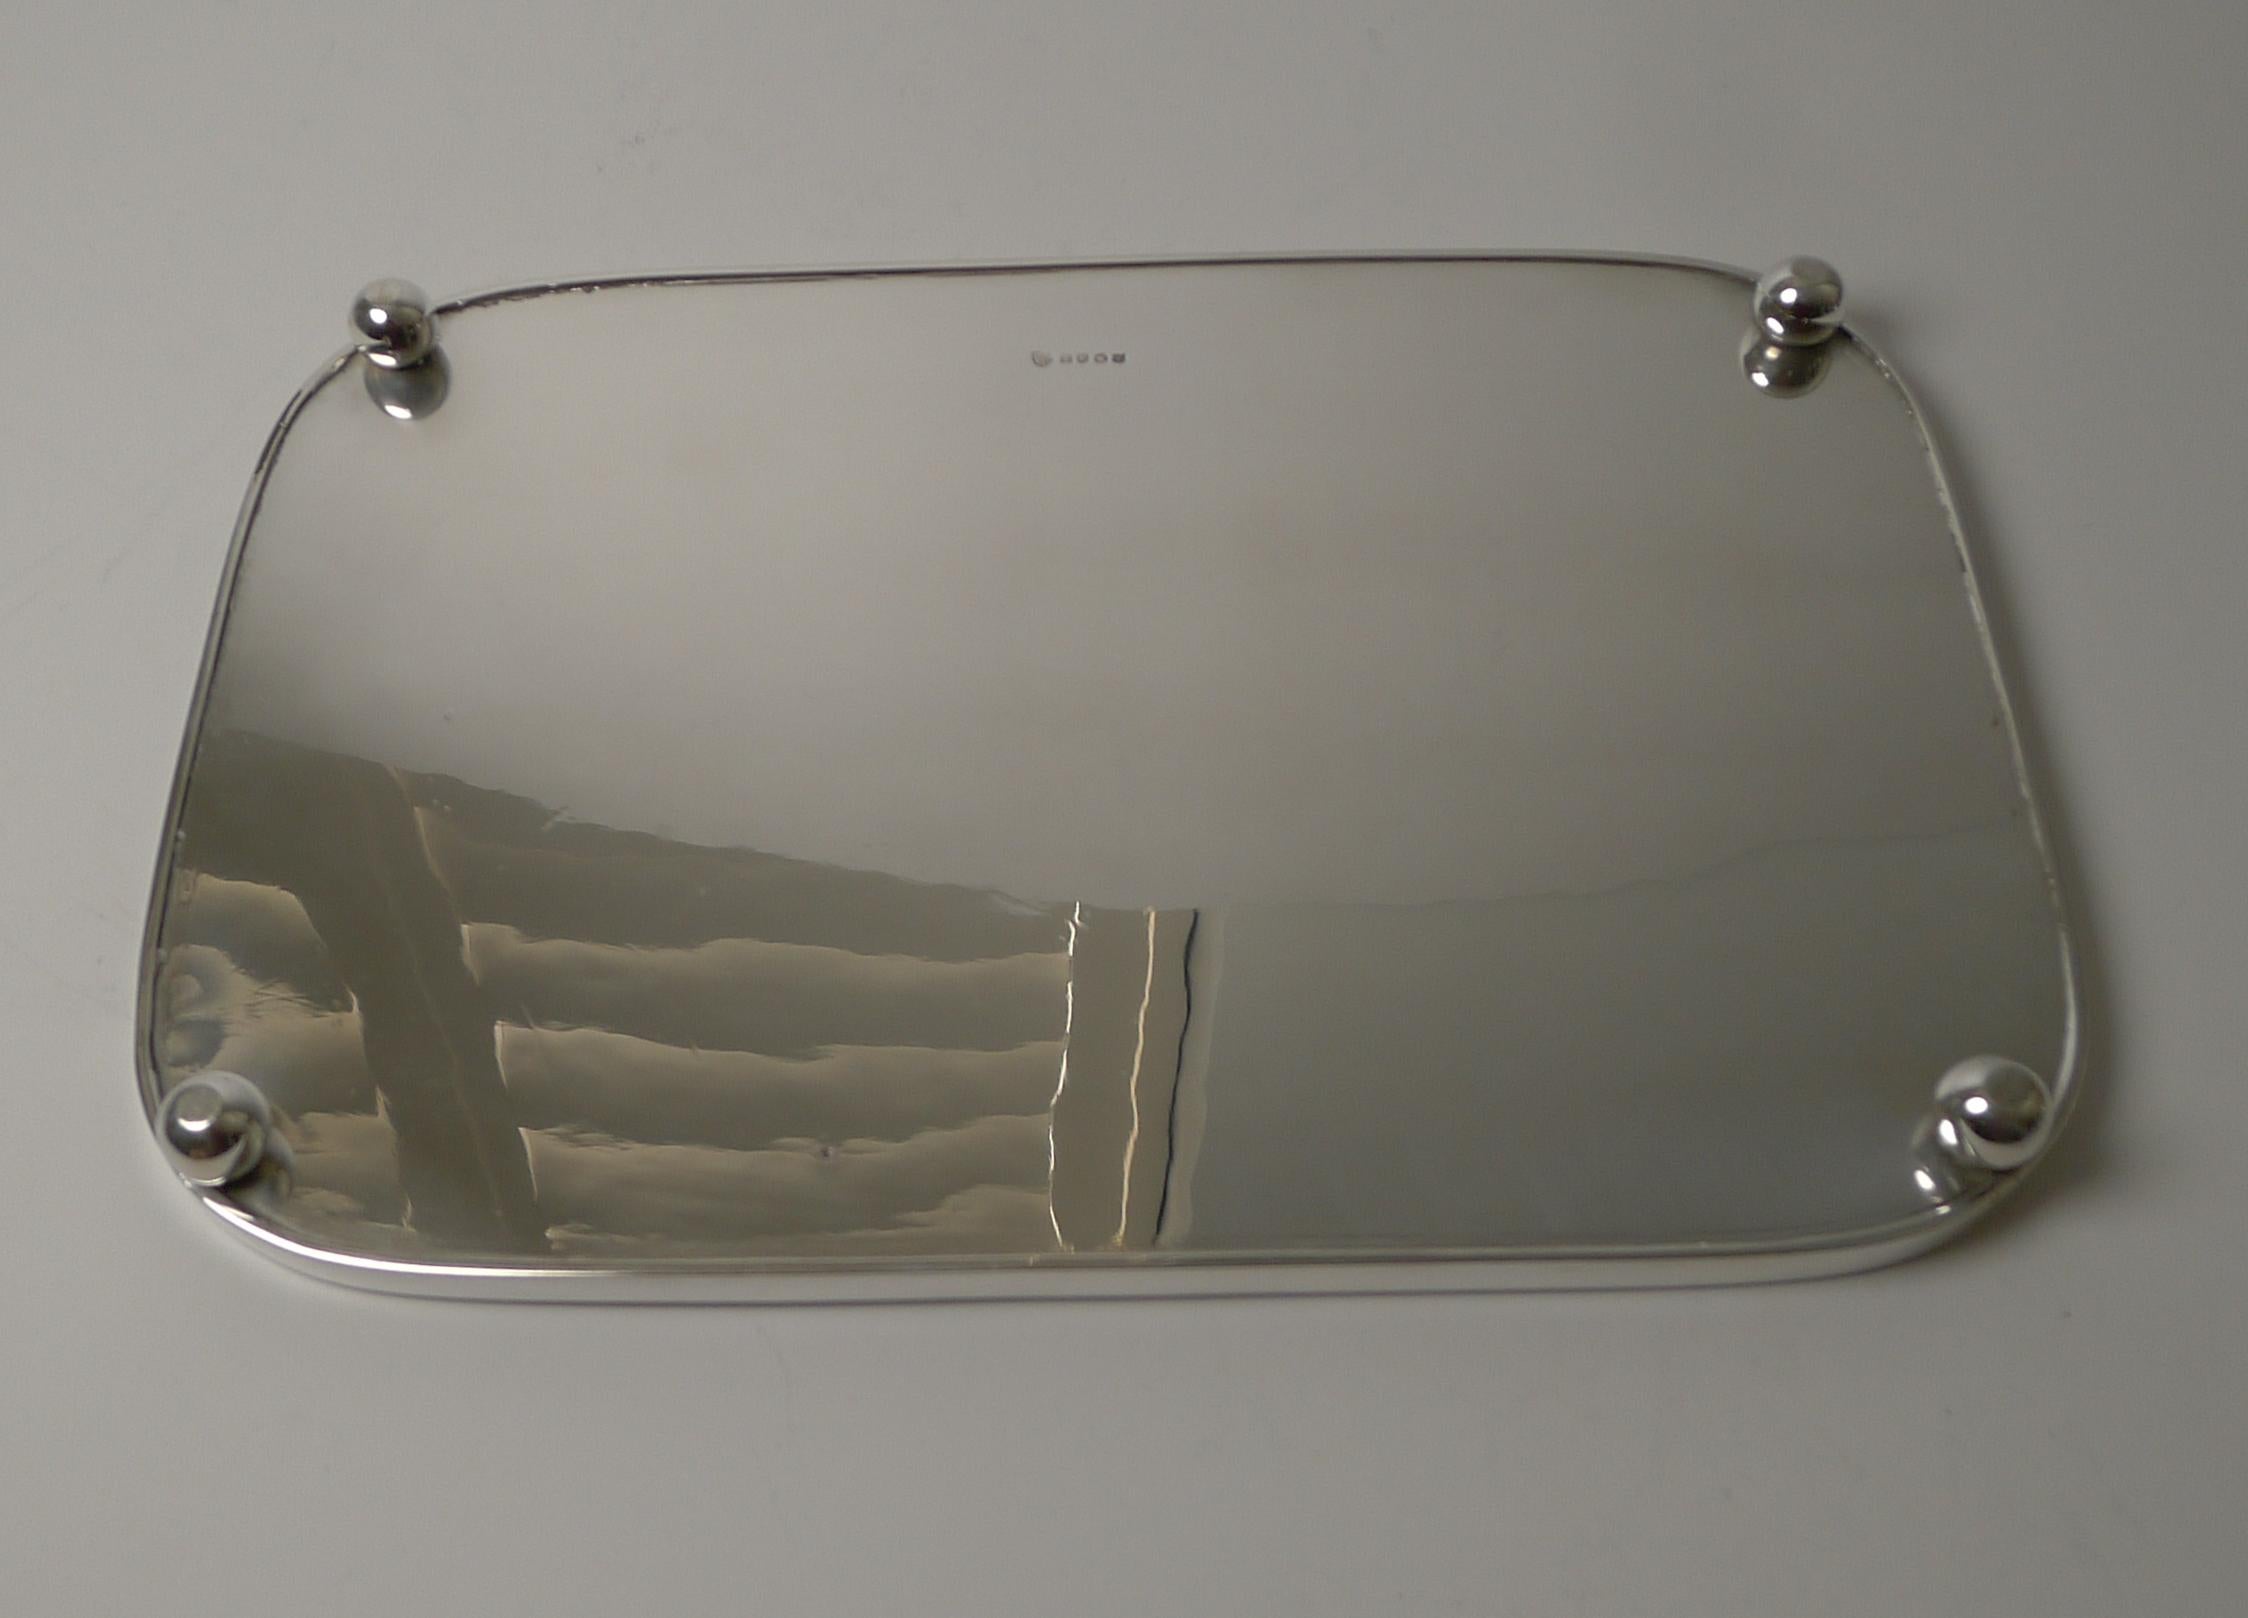 British Antique English Silver Plated Drinks / Cocktail Tray c.1880